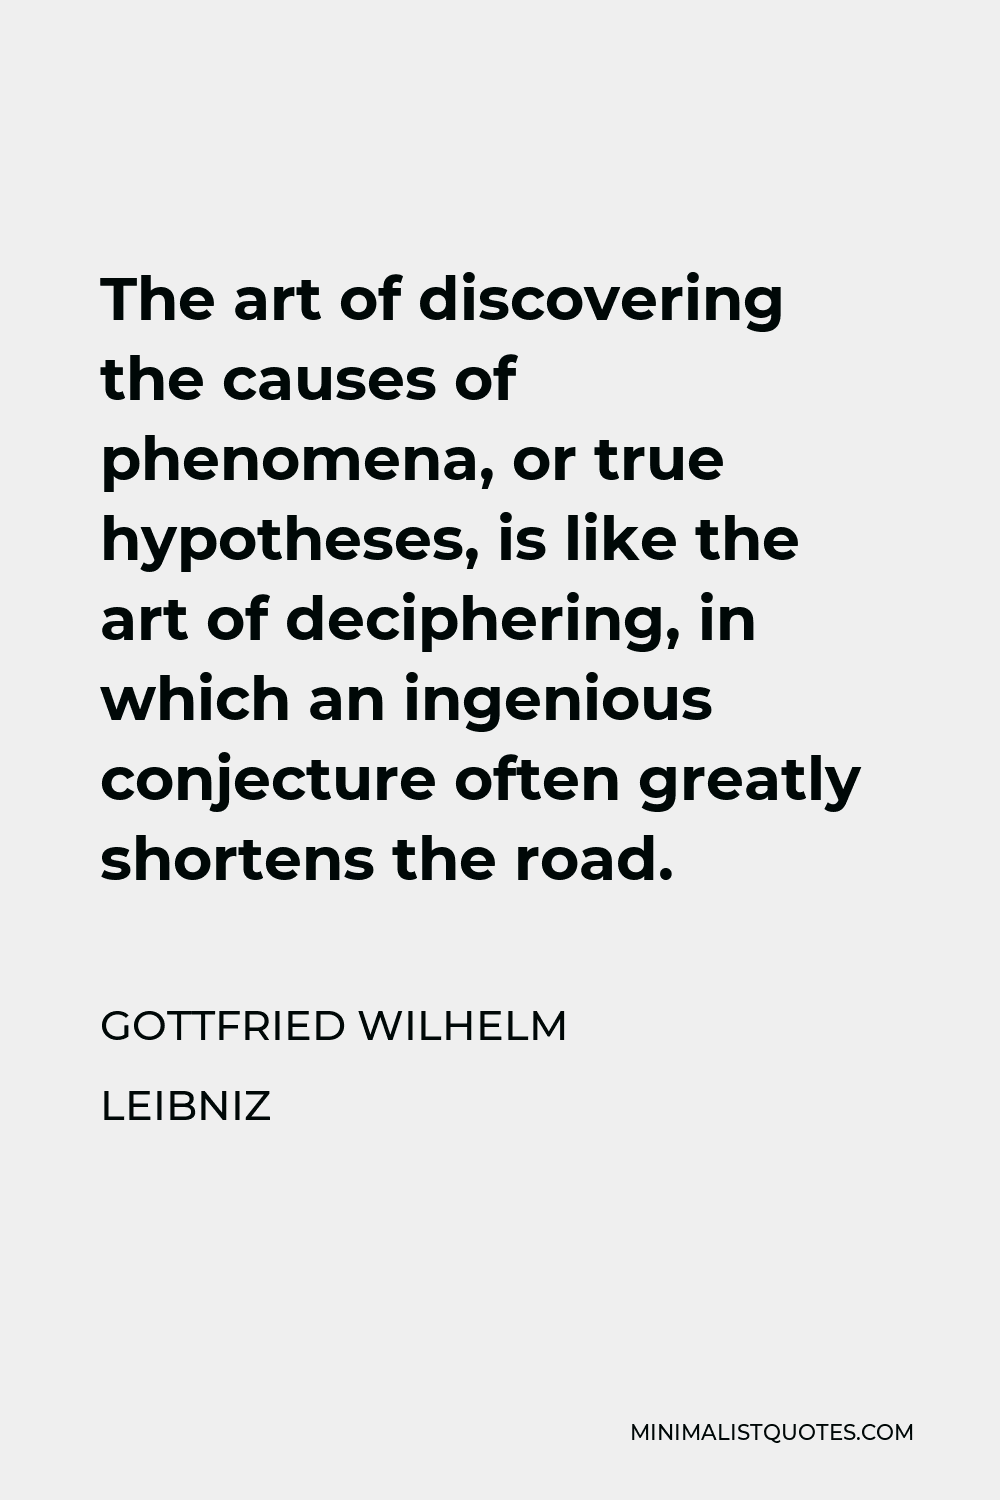 Gottfried Wilhelm Leibniz Quote - The art of discovering the causes of phenomena, or true hypotheses, is like the art of deciphering, in which an ingenious conjecture often greatly shortens the road.